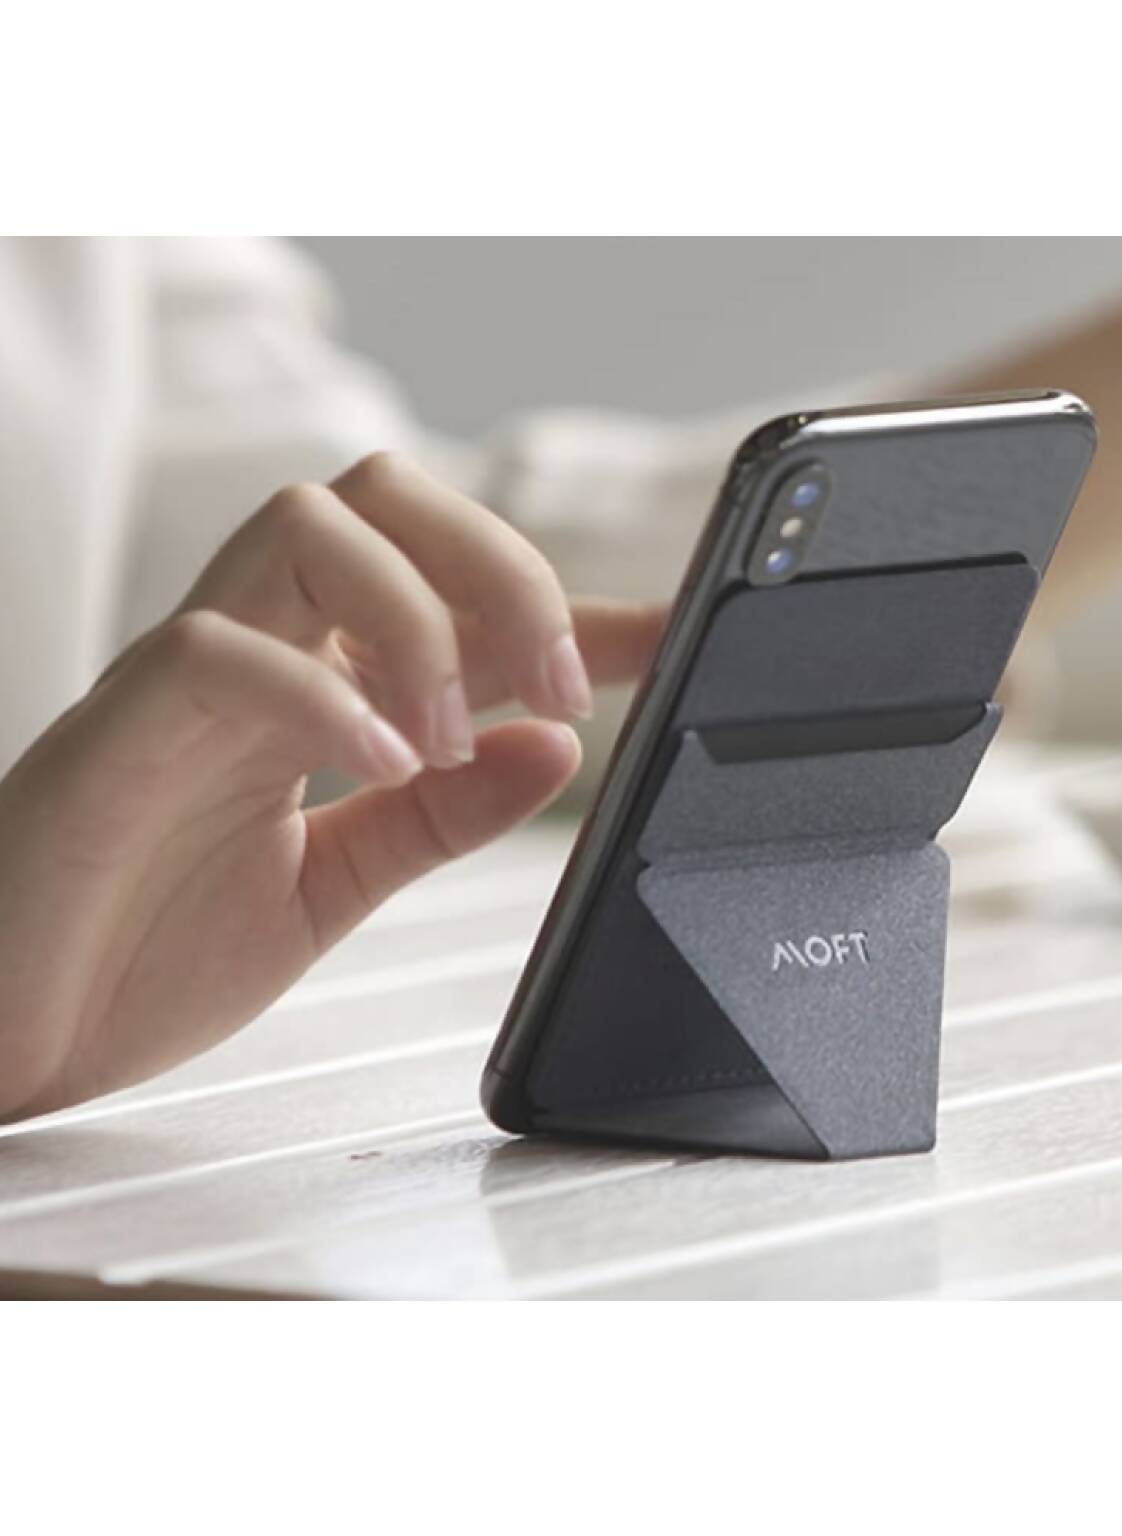 MOFT X – Invisible and Foldaway Stand for Phone/Tablet